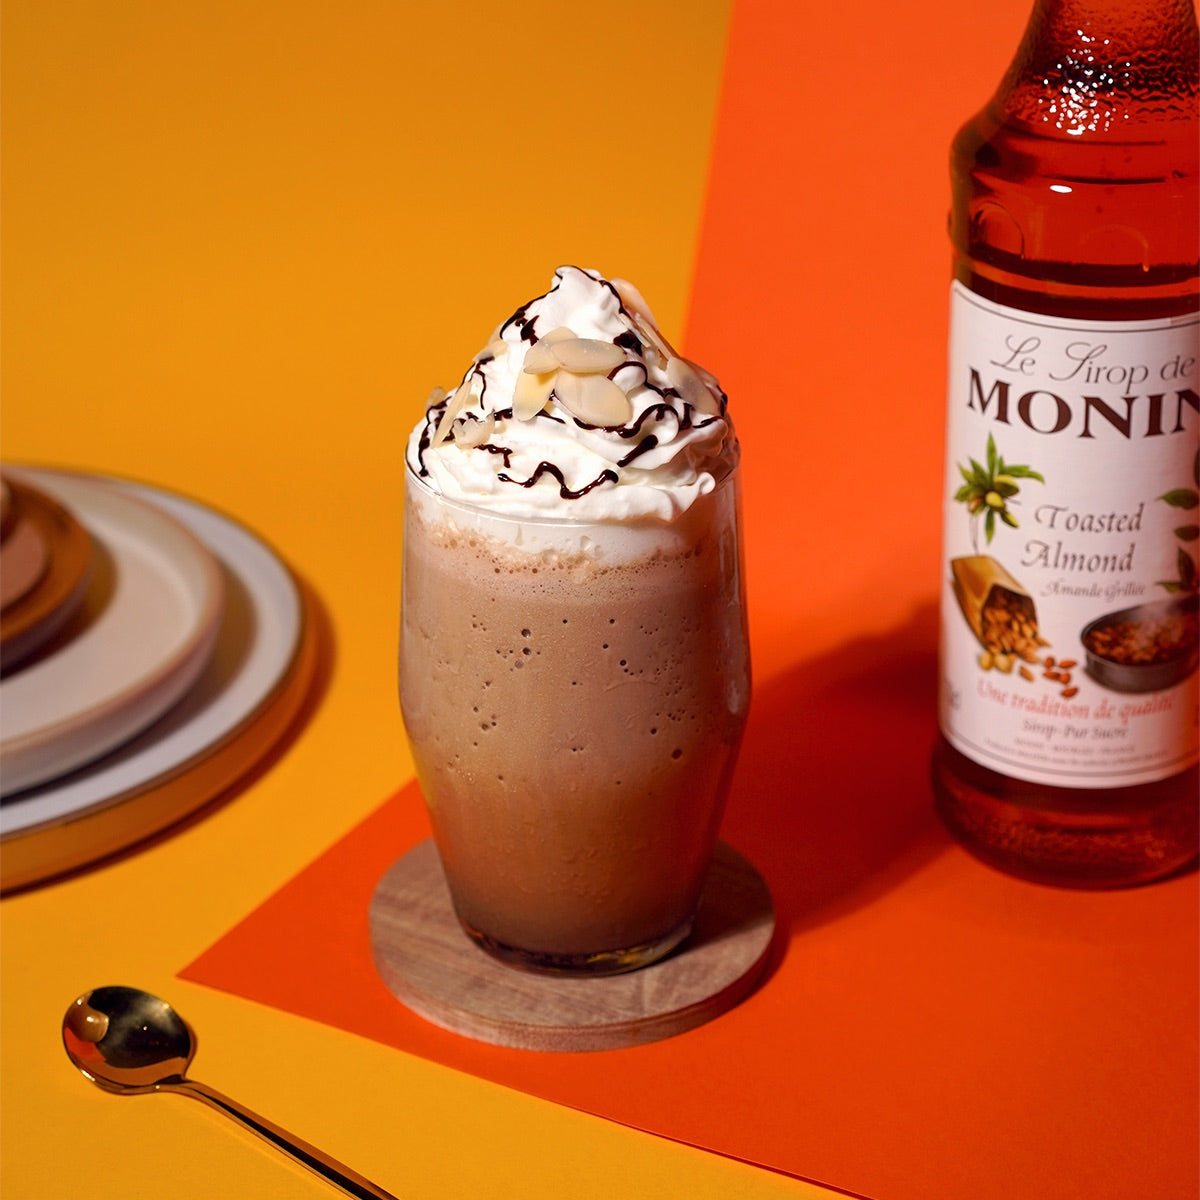 FLAVOUR OF THE MONTH: LE SIROP DE MONIN TOASTED ALMOND